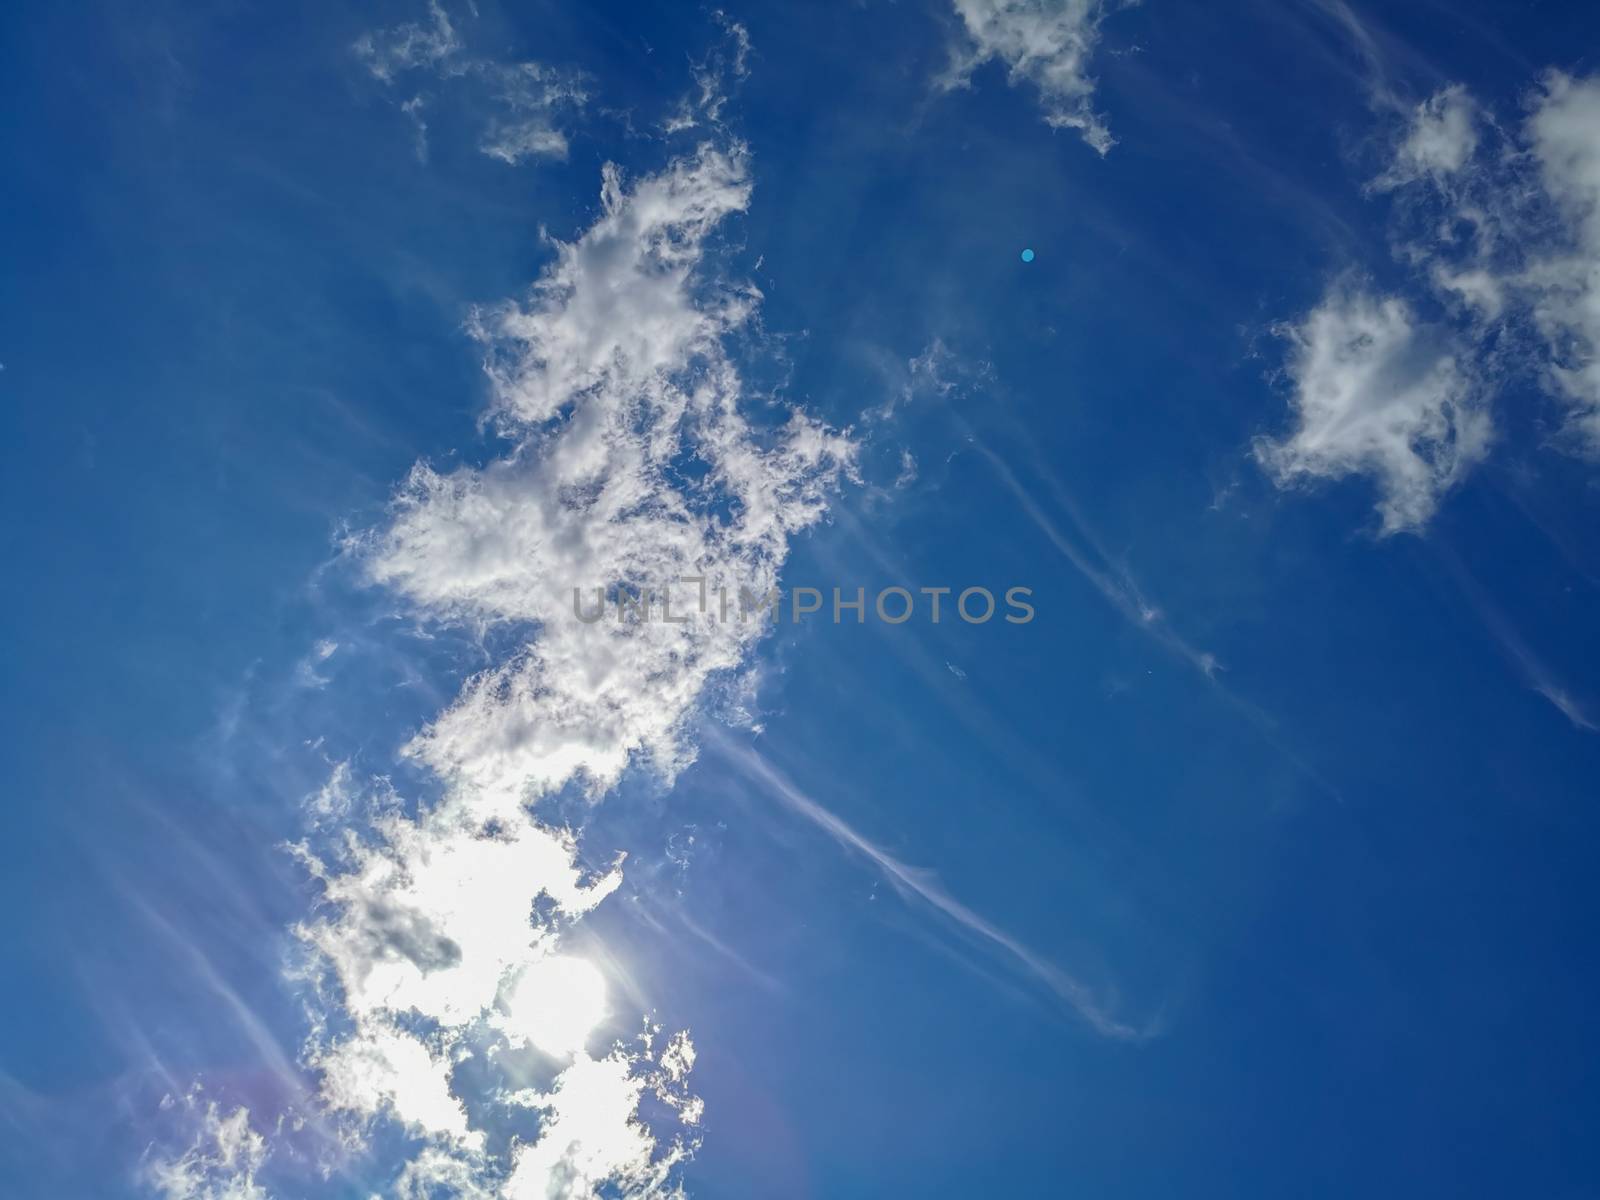 Clouds with blue a dark blue sky with copy space by PeterHofstetter